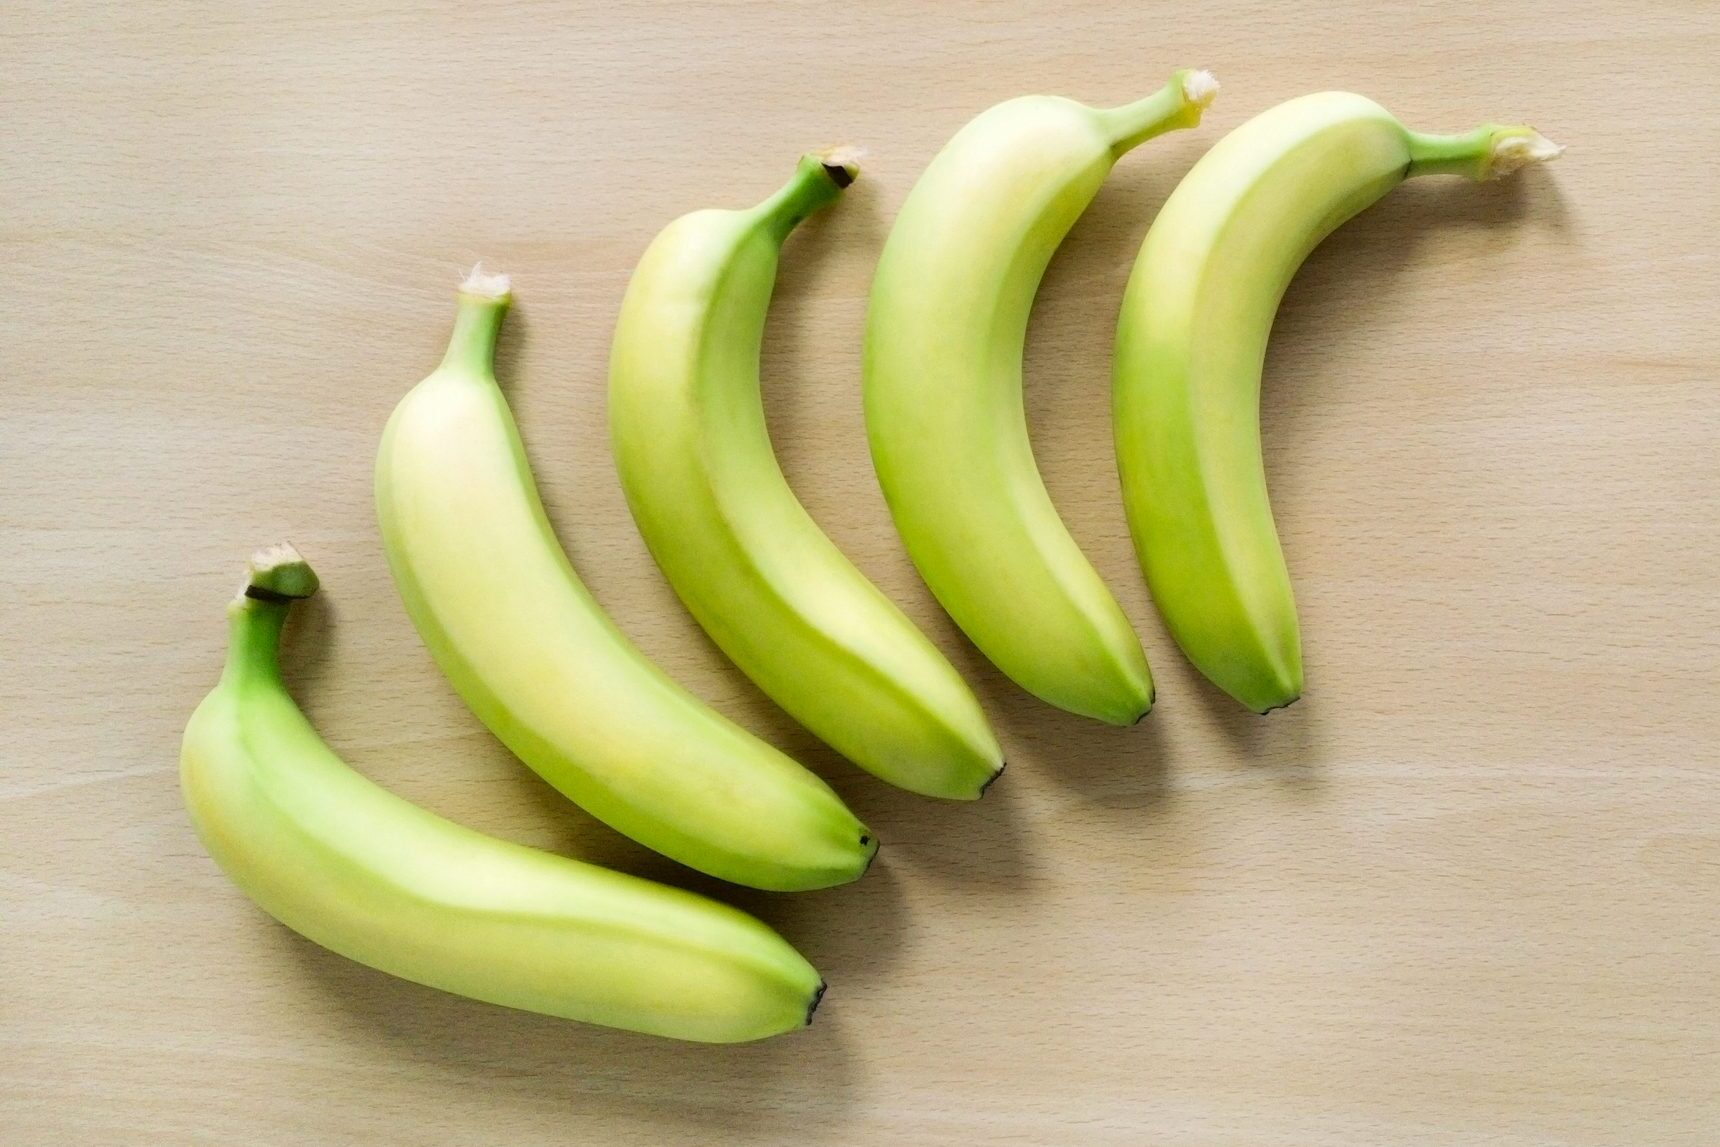 15-facts-about-green-bananas